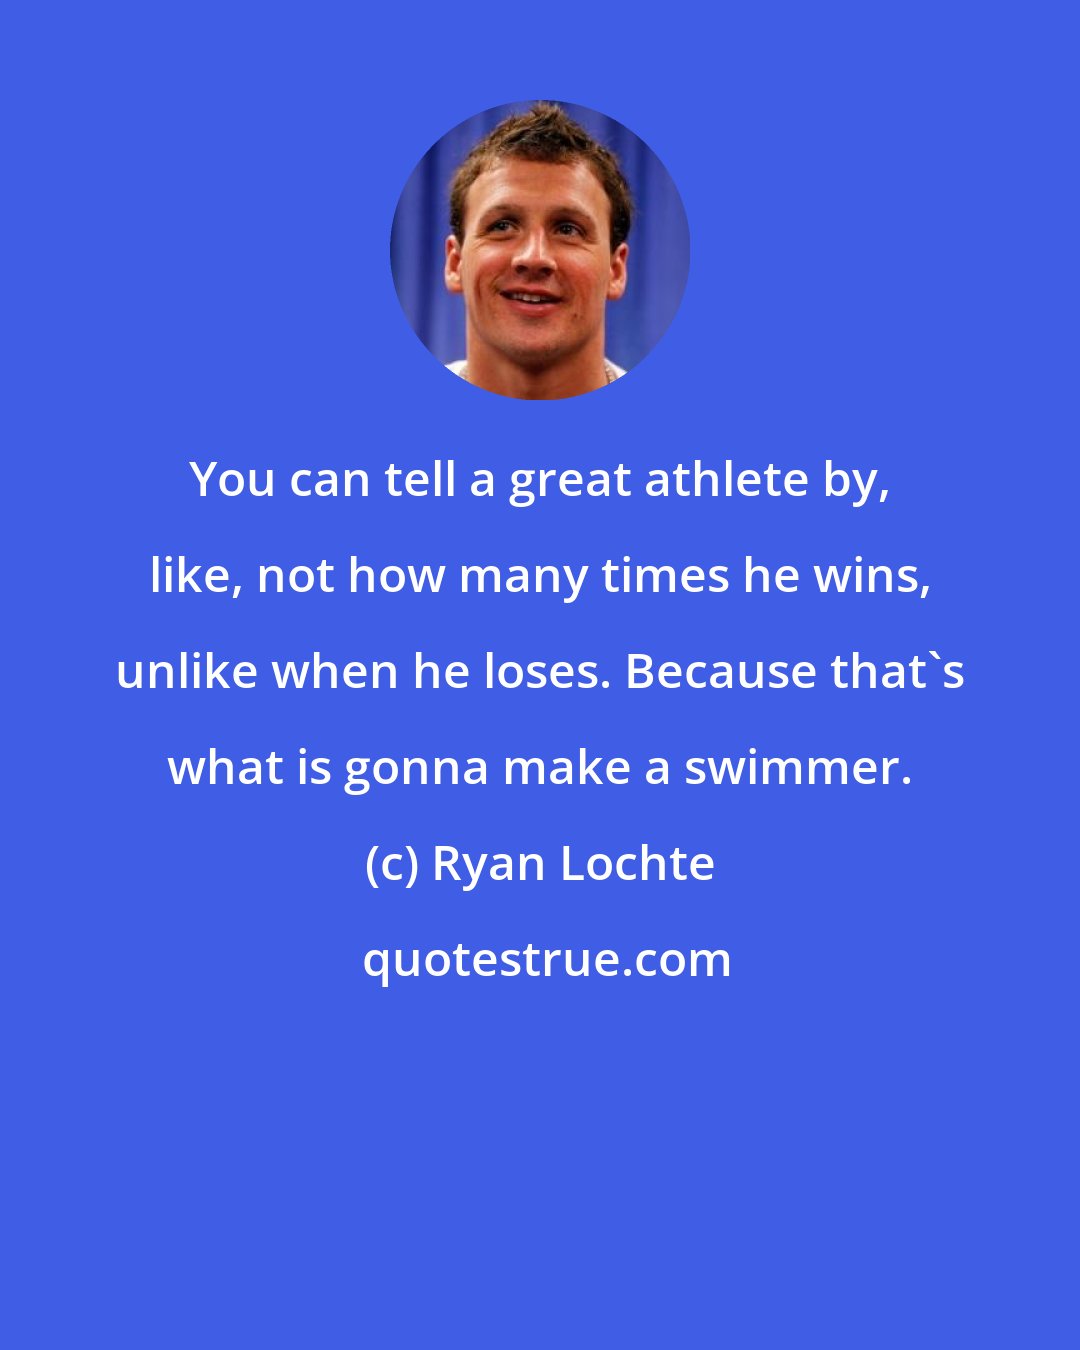 Ryan Lochte: You can tell a great athlete by, like, not how many times he wins, unlike when he loses. Because that's what is gonna make a swimmer.